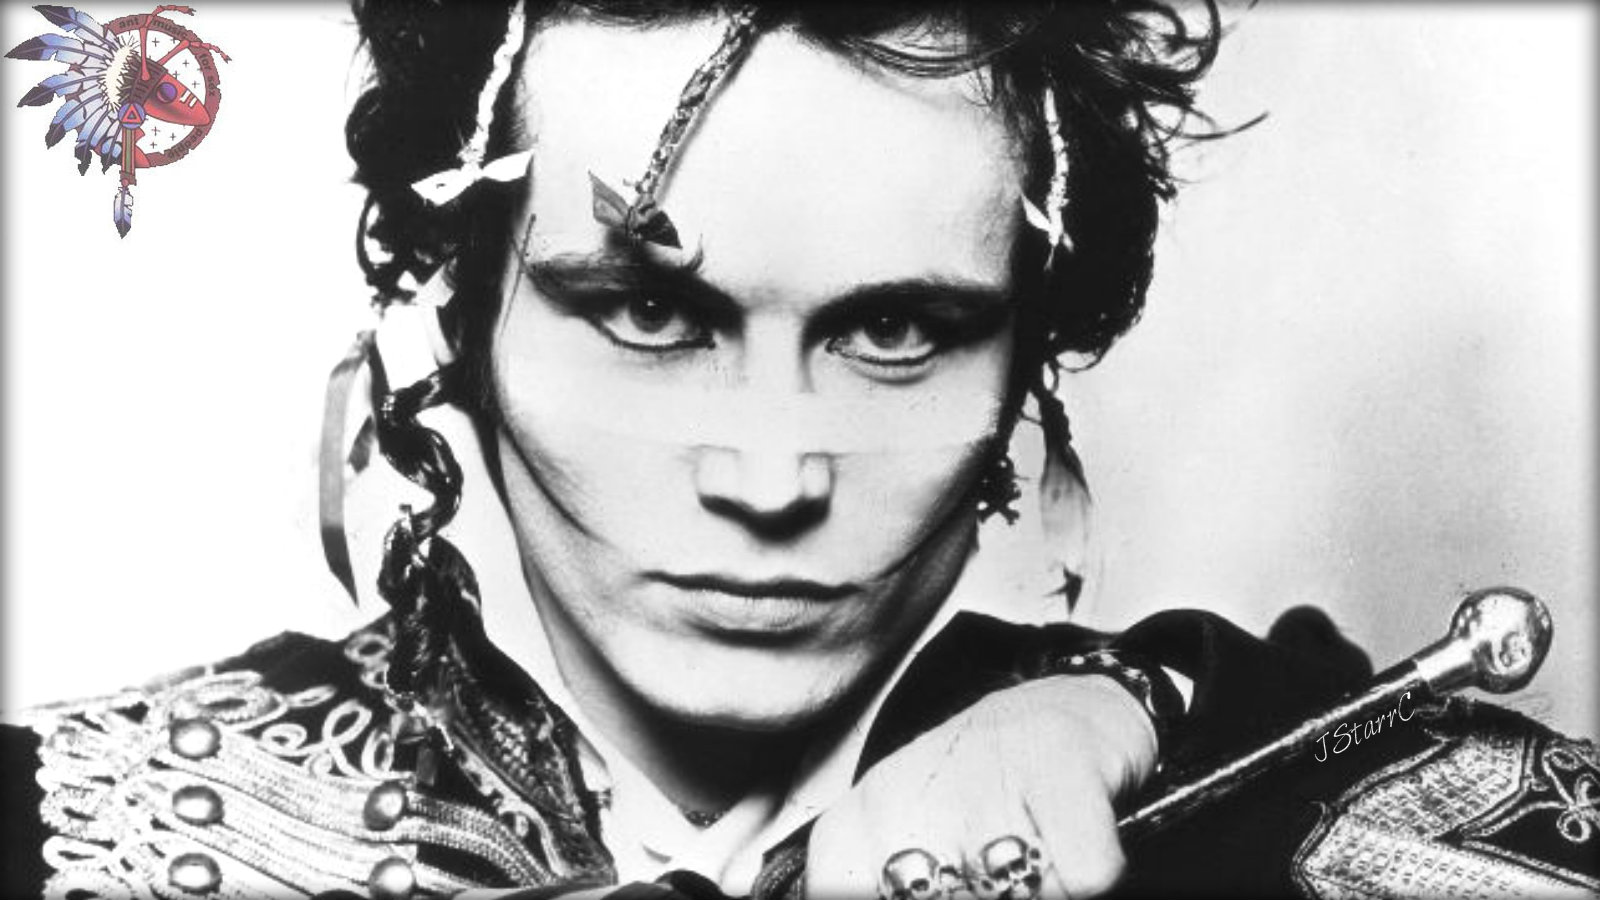 adam ant, images, image, wallpaper, photos, photo, photograph, gallery, pho...